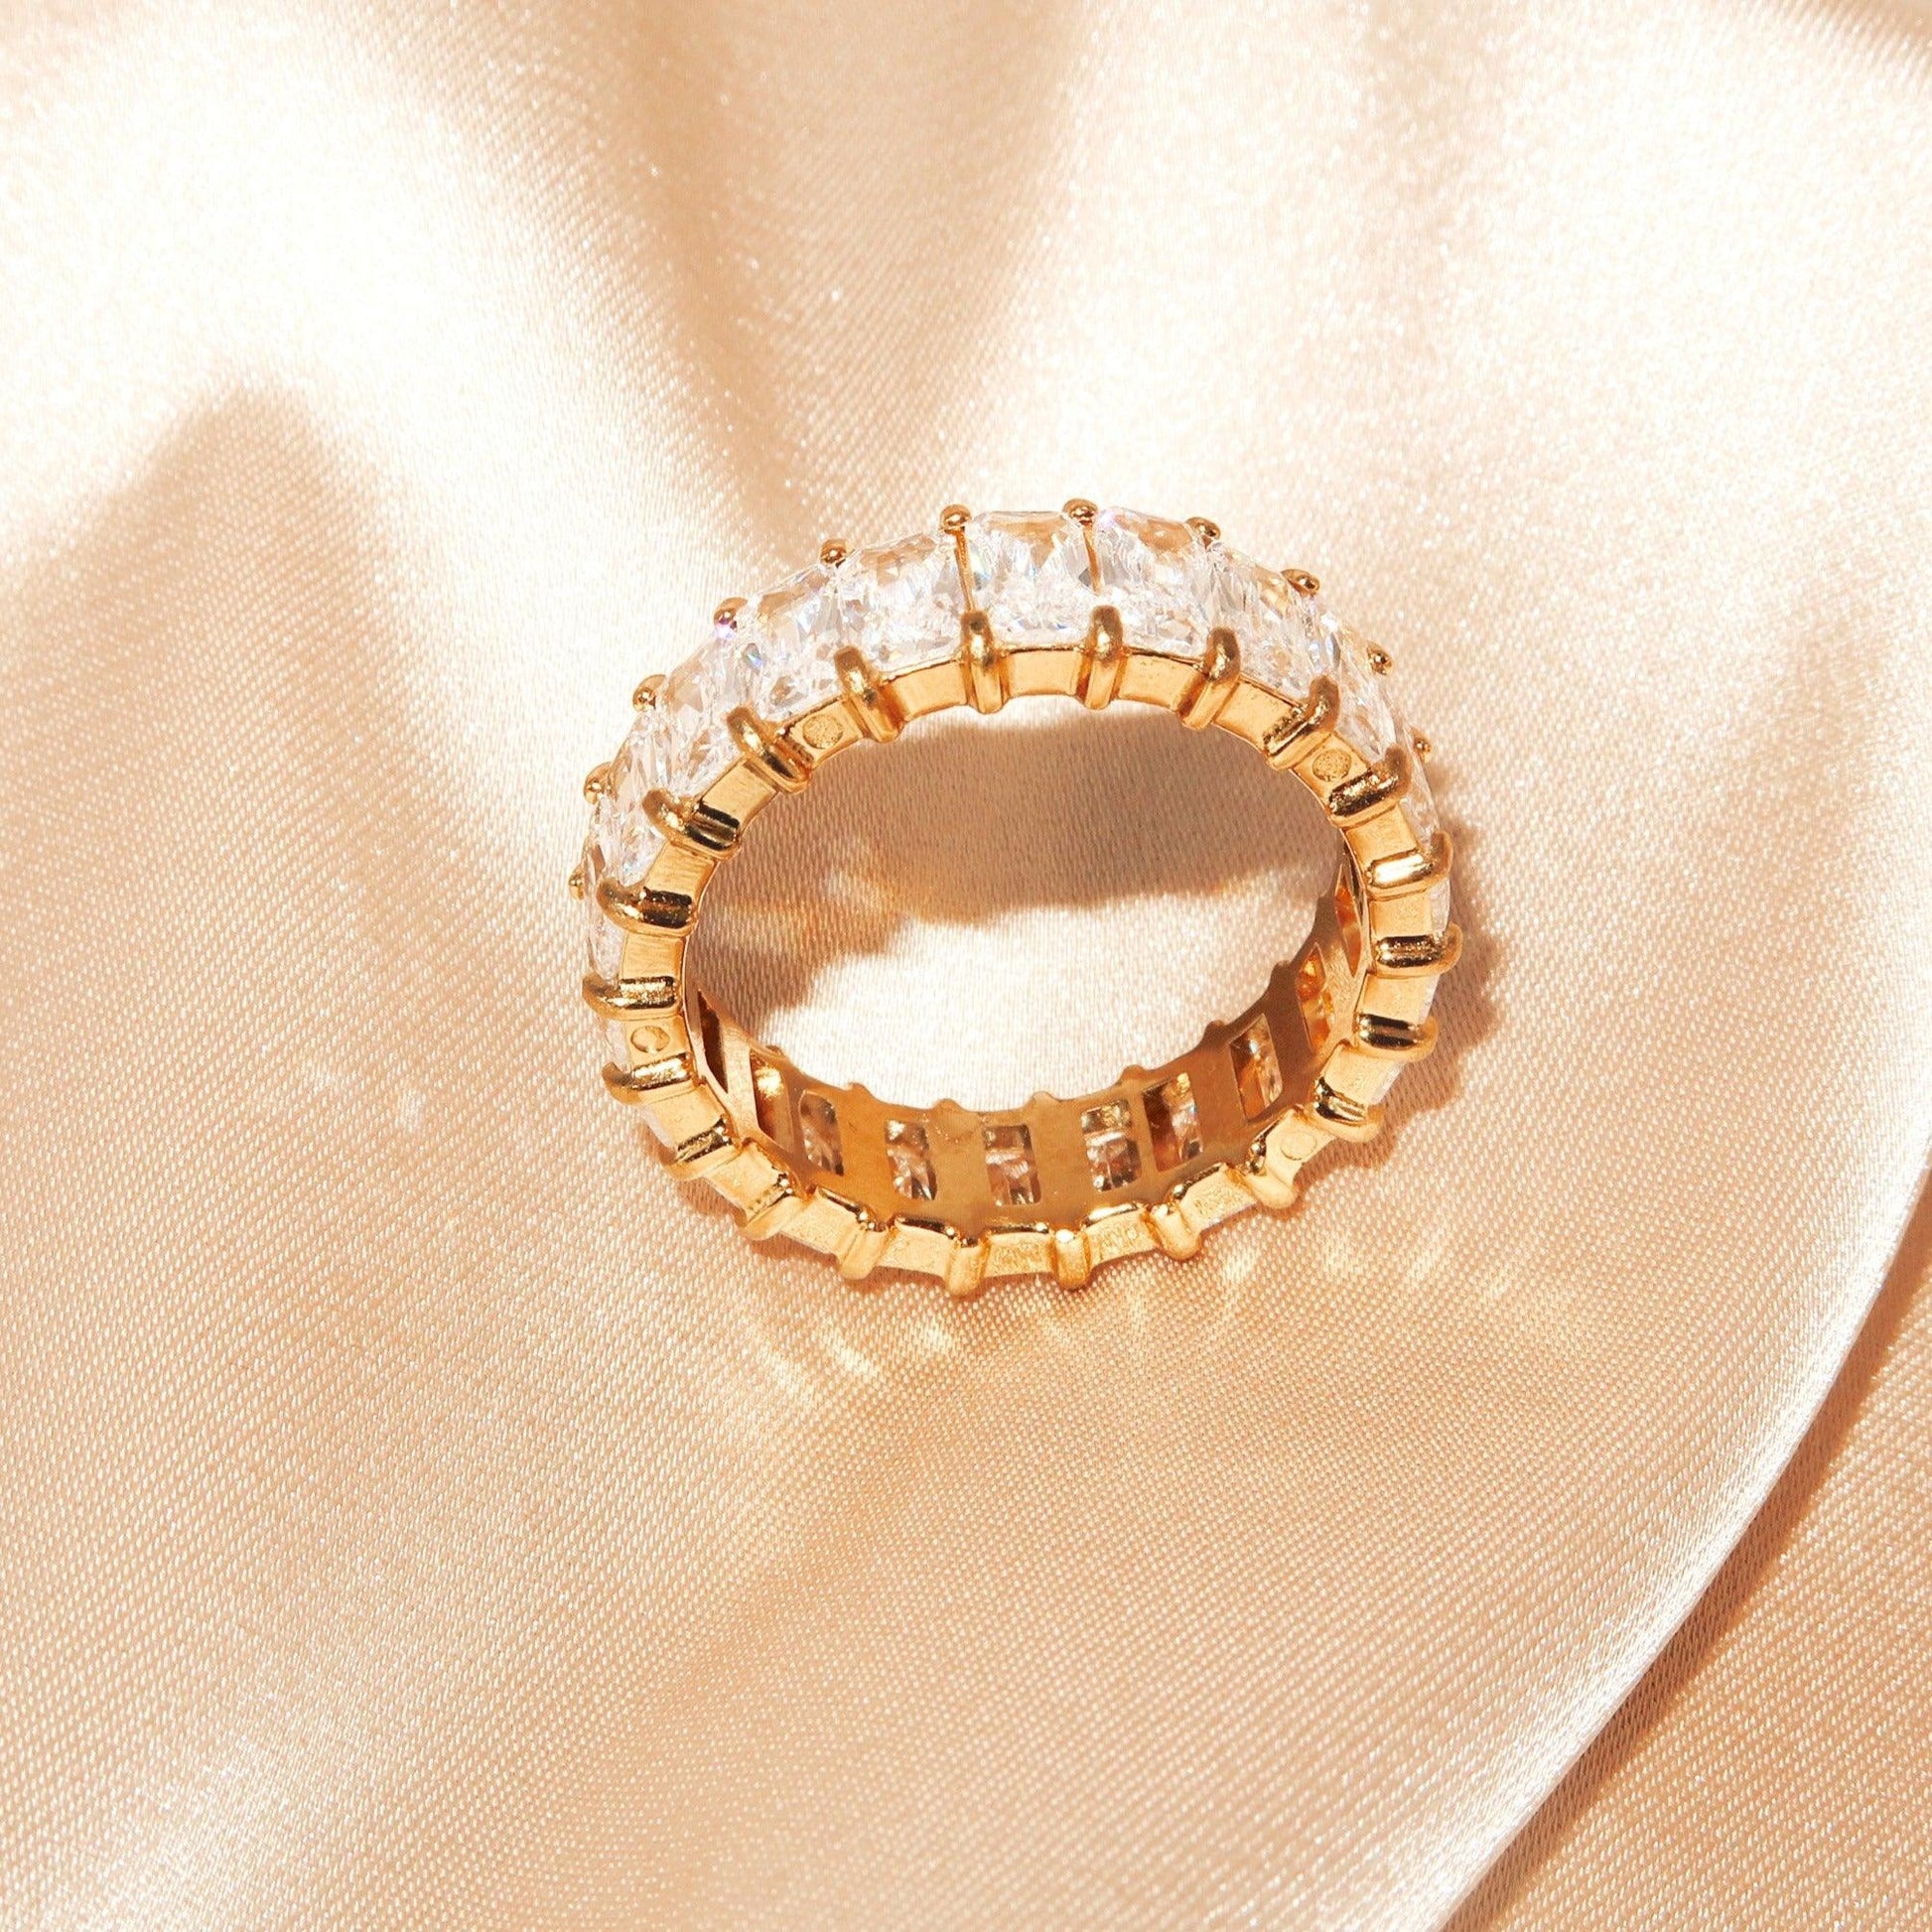 ANN - 18K PVD Gold Plated Ring with Emerald Cut CZ Stones - Mixed Metals